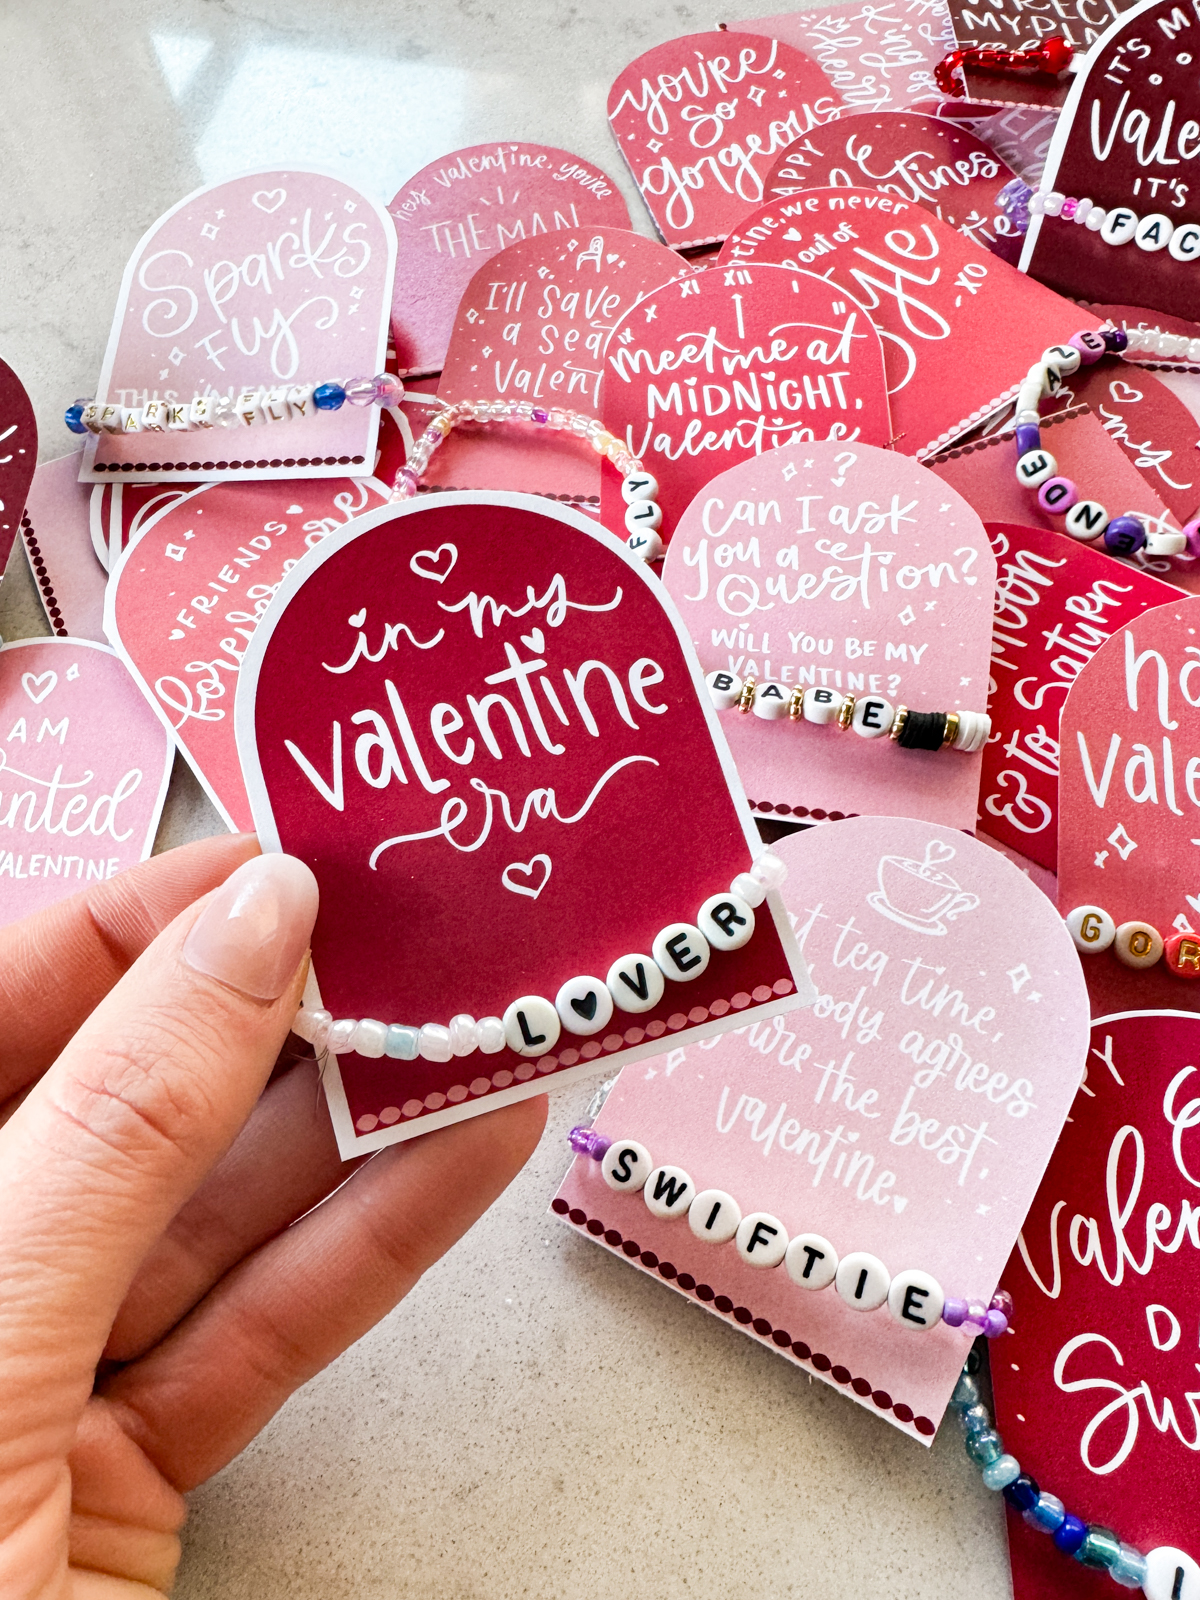 taylor swift themed valentines day cards printed and cut to size (pink and deep burgundy color with white hand lettered song lyrics) shown on marble countertop with beaded friendship bracelets around the arched cards. shown valentine reads 'in my valentine era' with a 'lover bracelet'